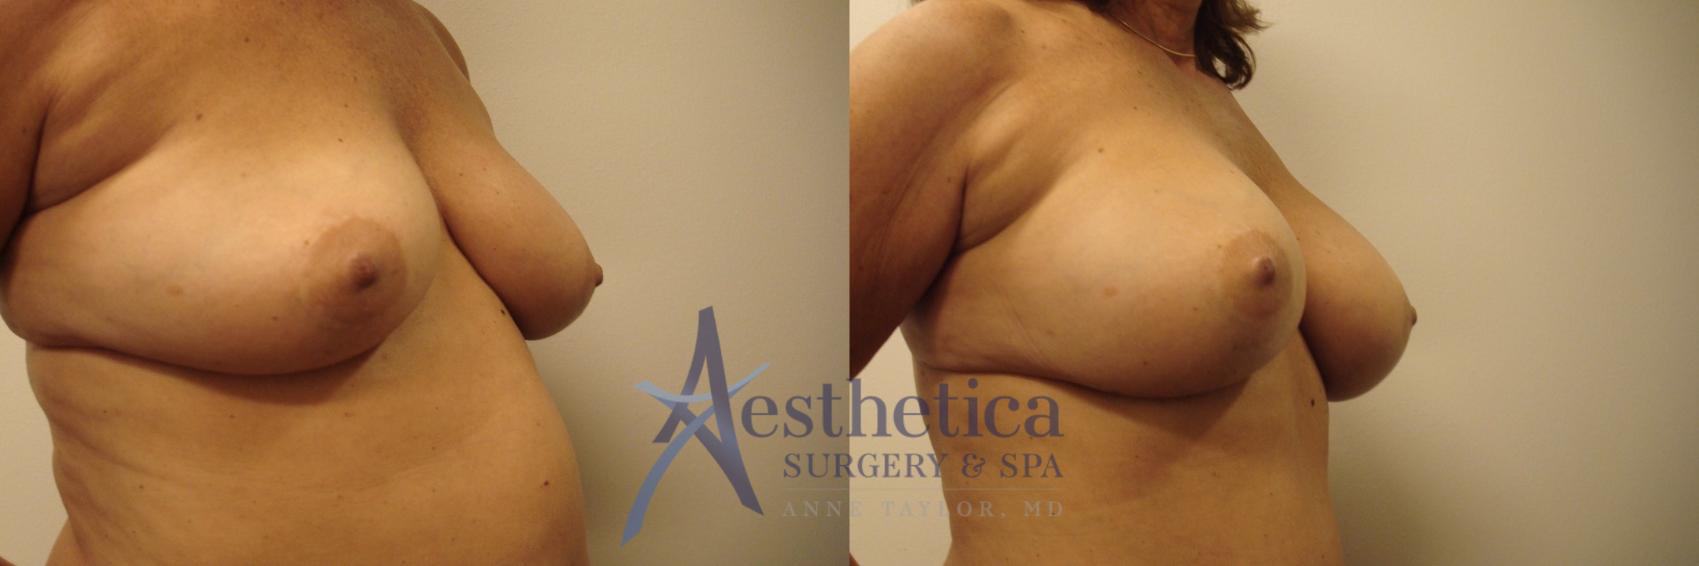 Breast Augmentation Case 438 Before & After Right Side | Worthington, OH | Aesthetica Surgery & Spa